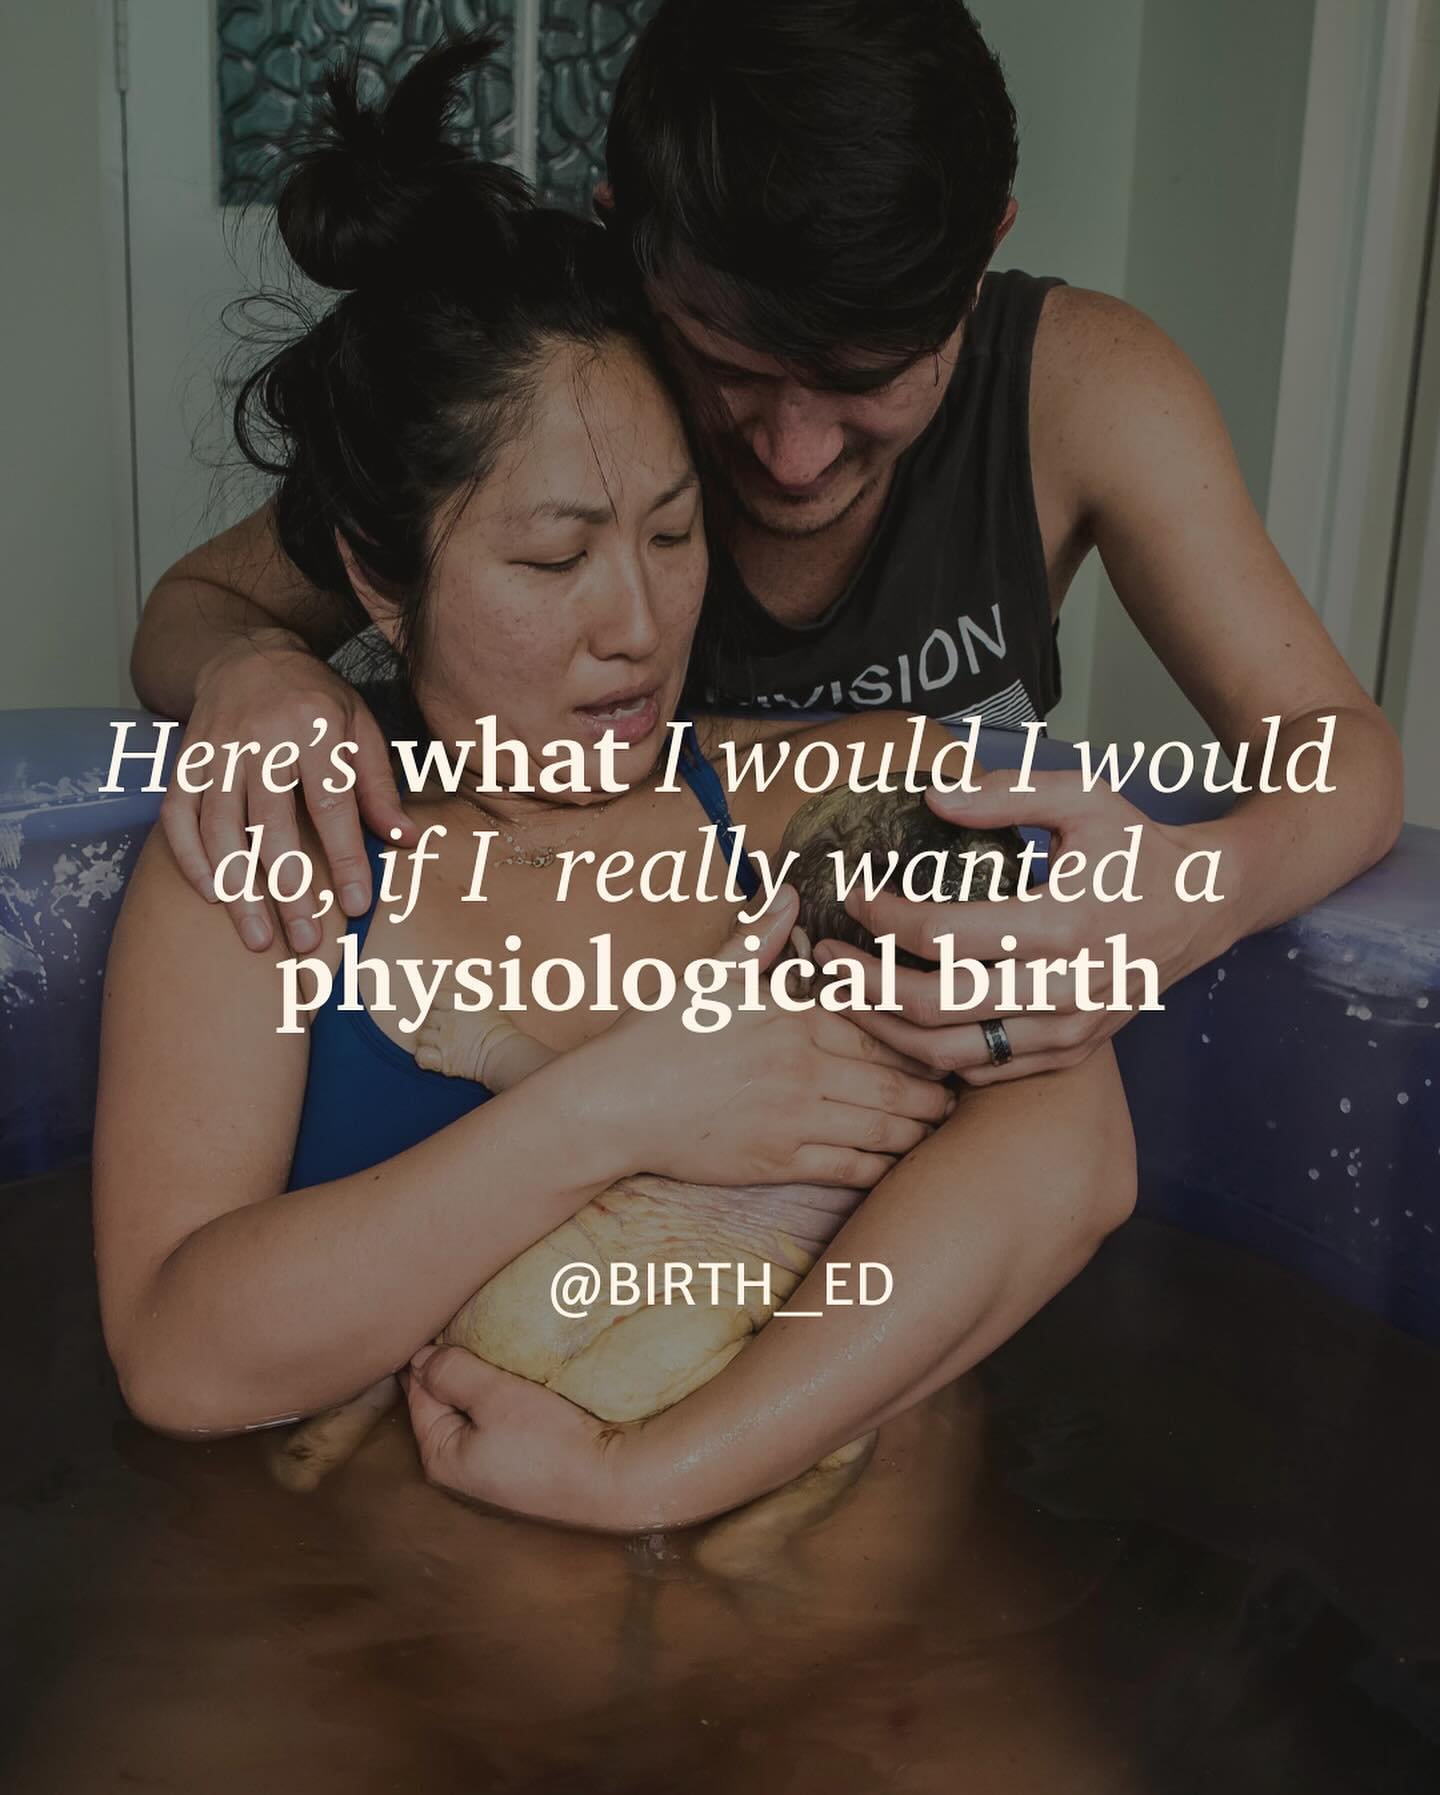 Here&rsquo;s what I would I would do, if having a physiological birth was important to me.

Research shows that &gt;80% of women would LIKE to plan for a straightforward vaginal birth. 

But the maternity system isn&rsquo;t set up to support it and t